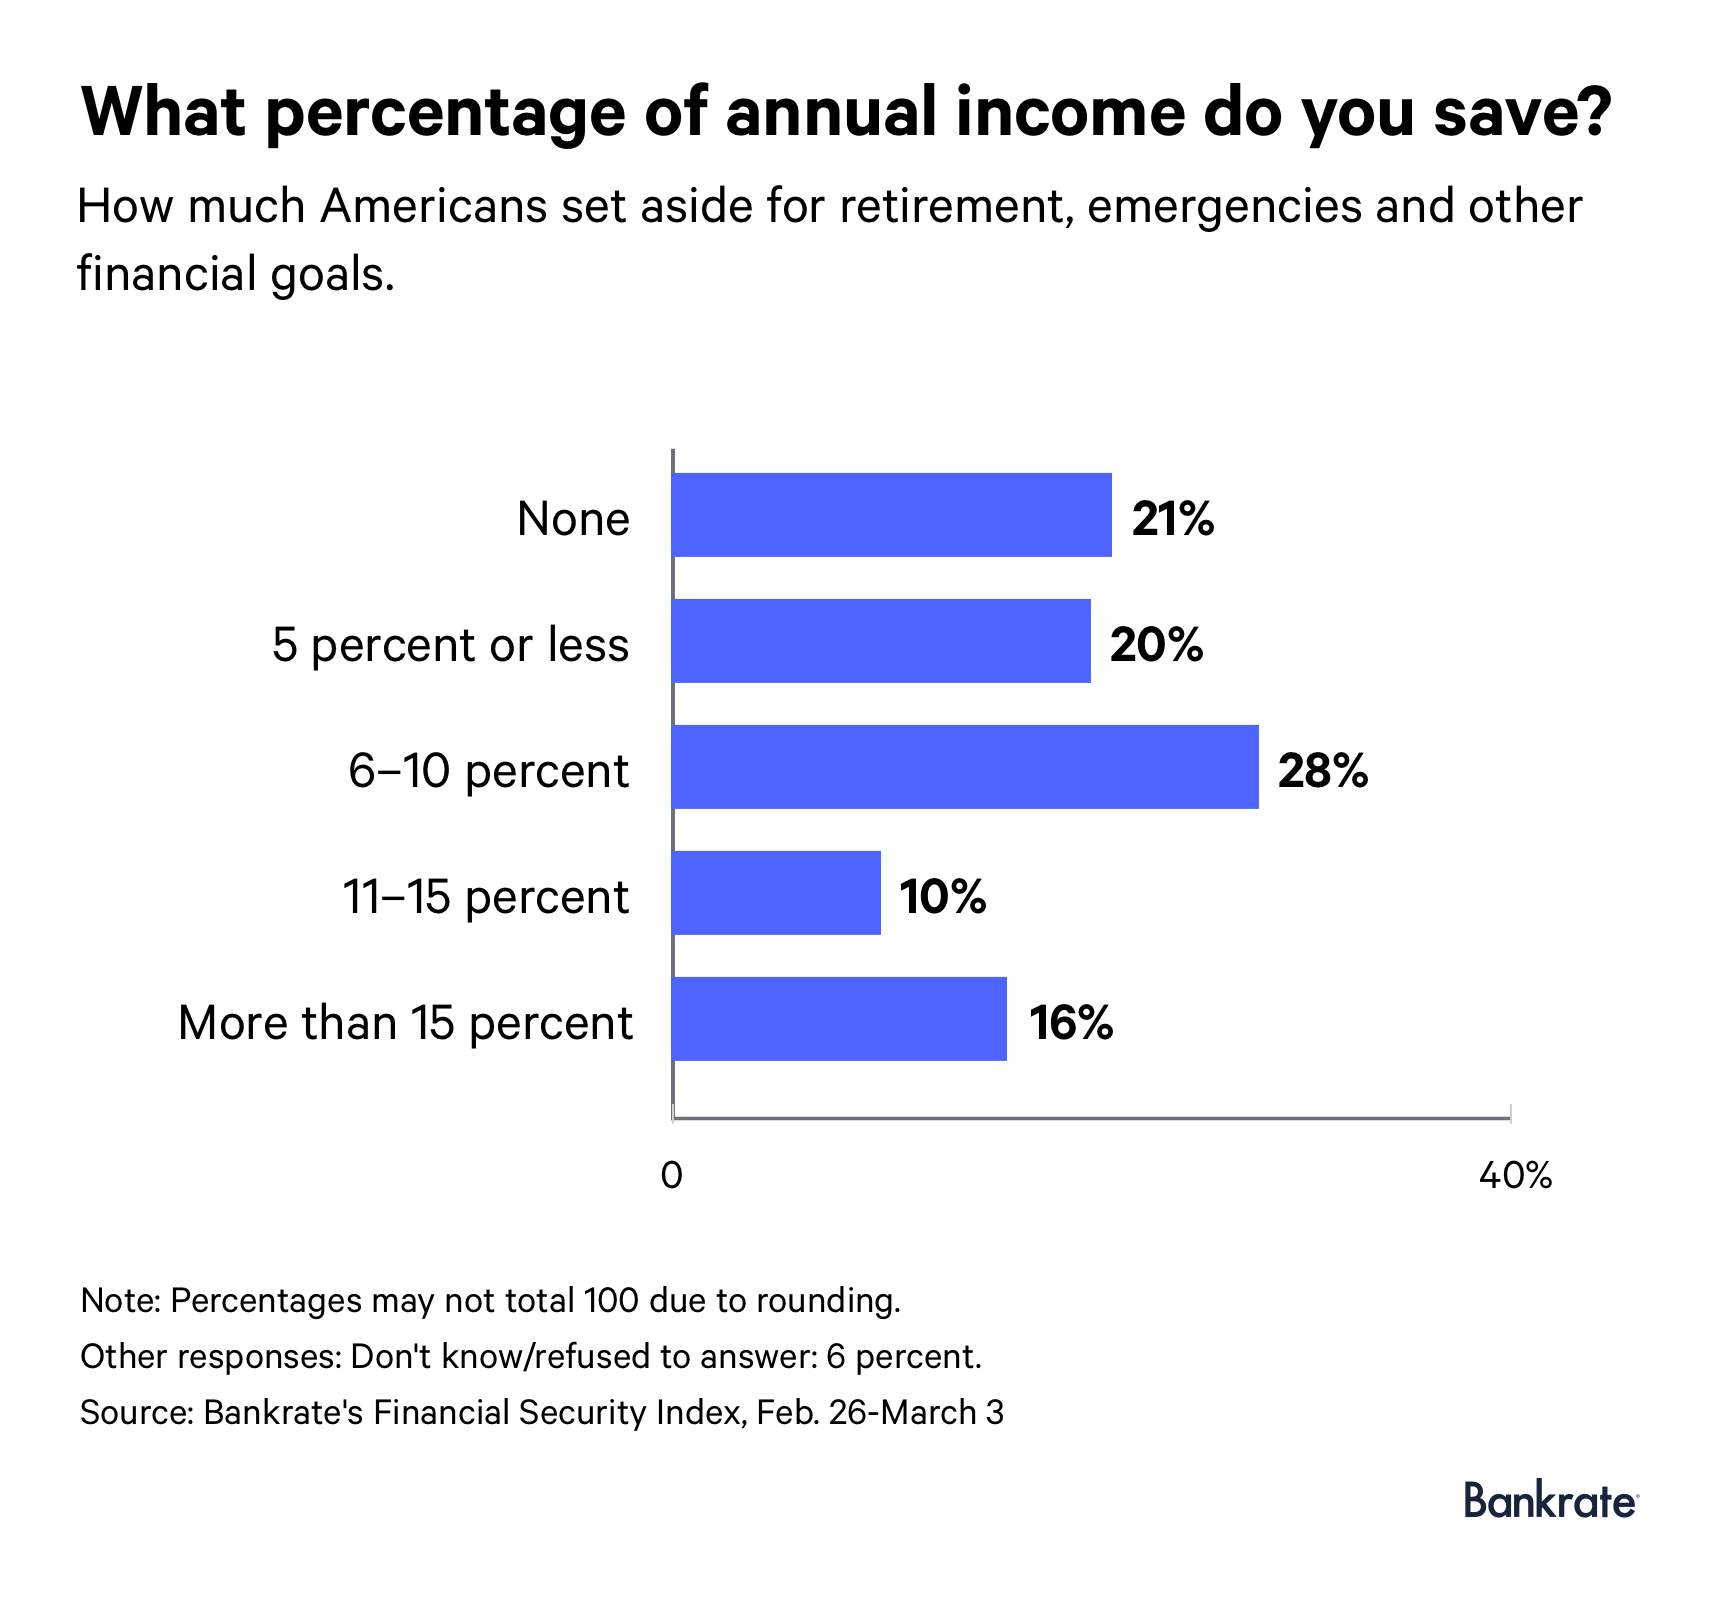 Graph: 28% of Americans are saving 6–10 percent of their annual income.